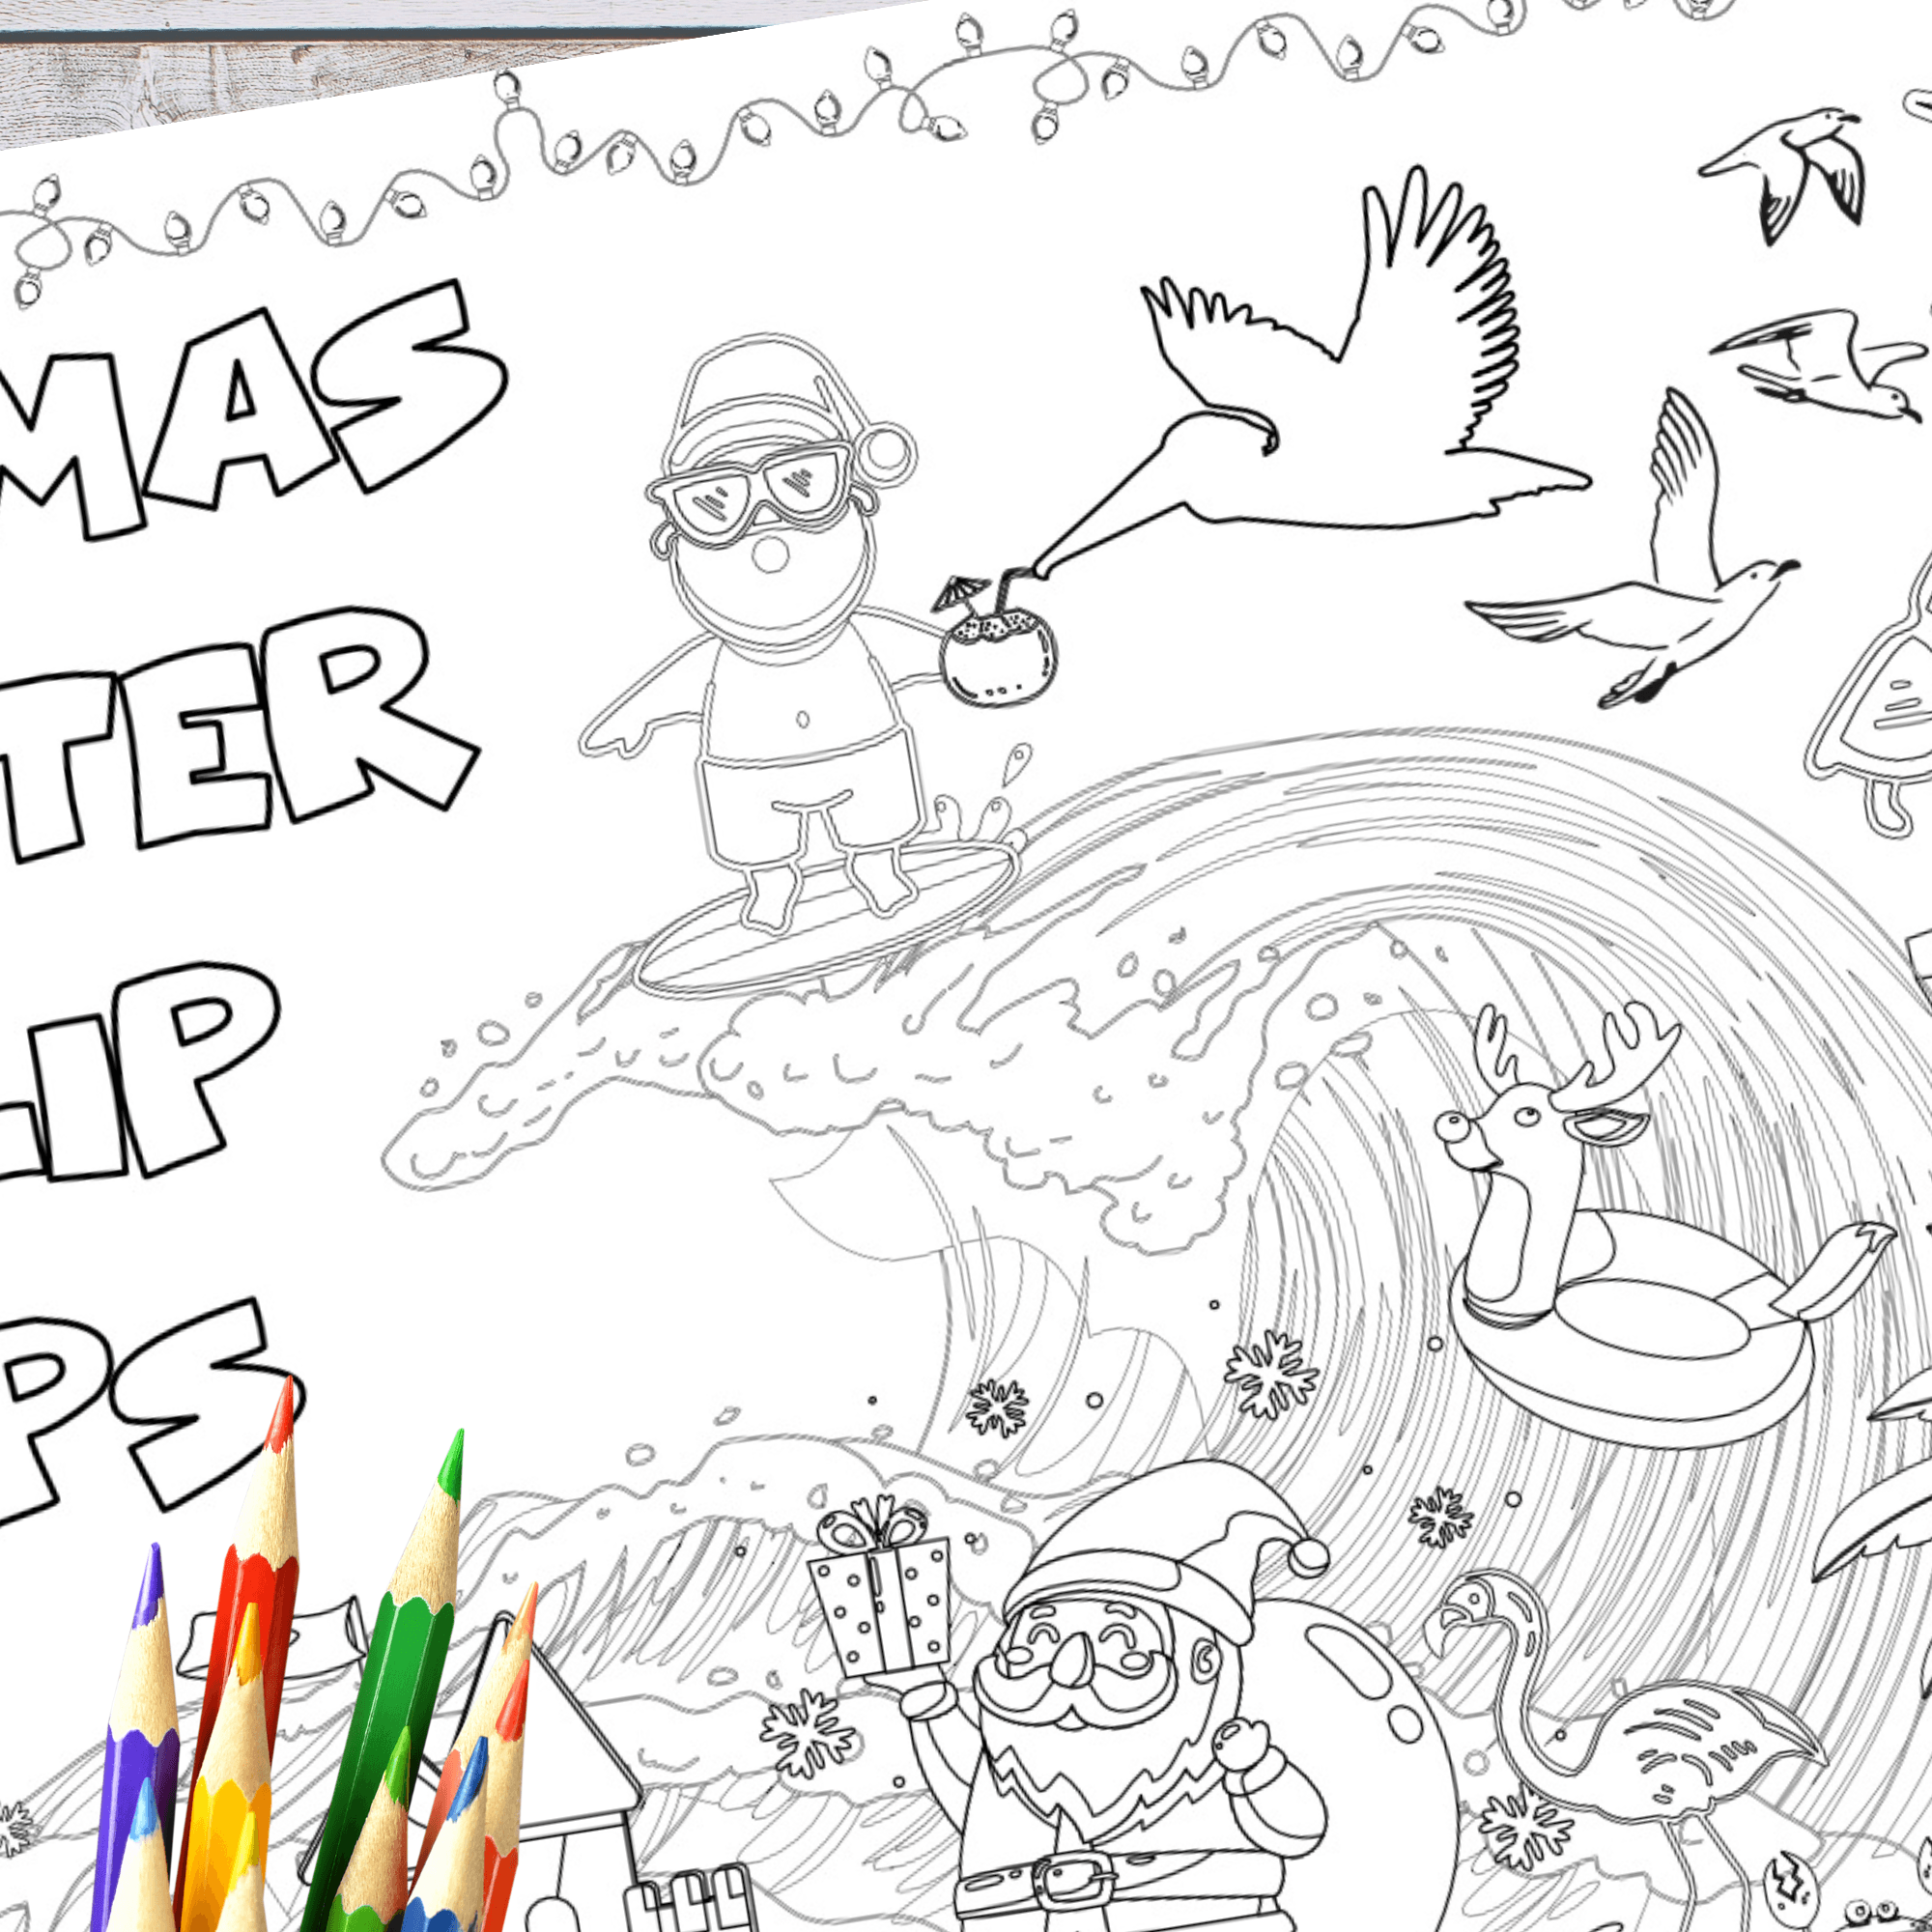 Christmas Coloring Activity Table Cover | Amazing Pinatas 